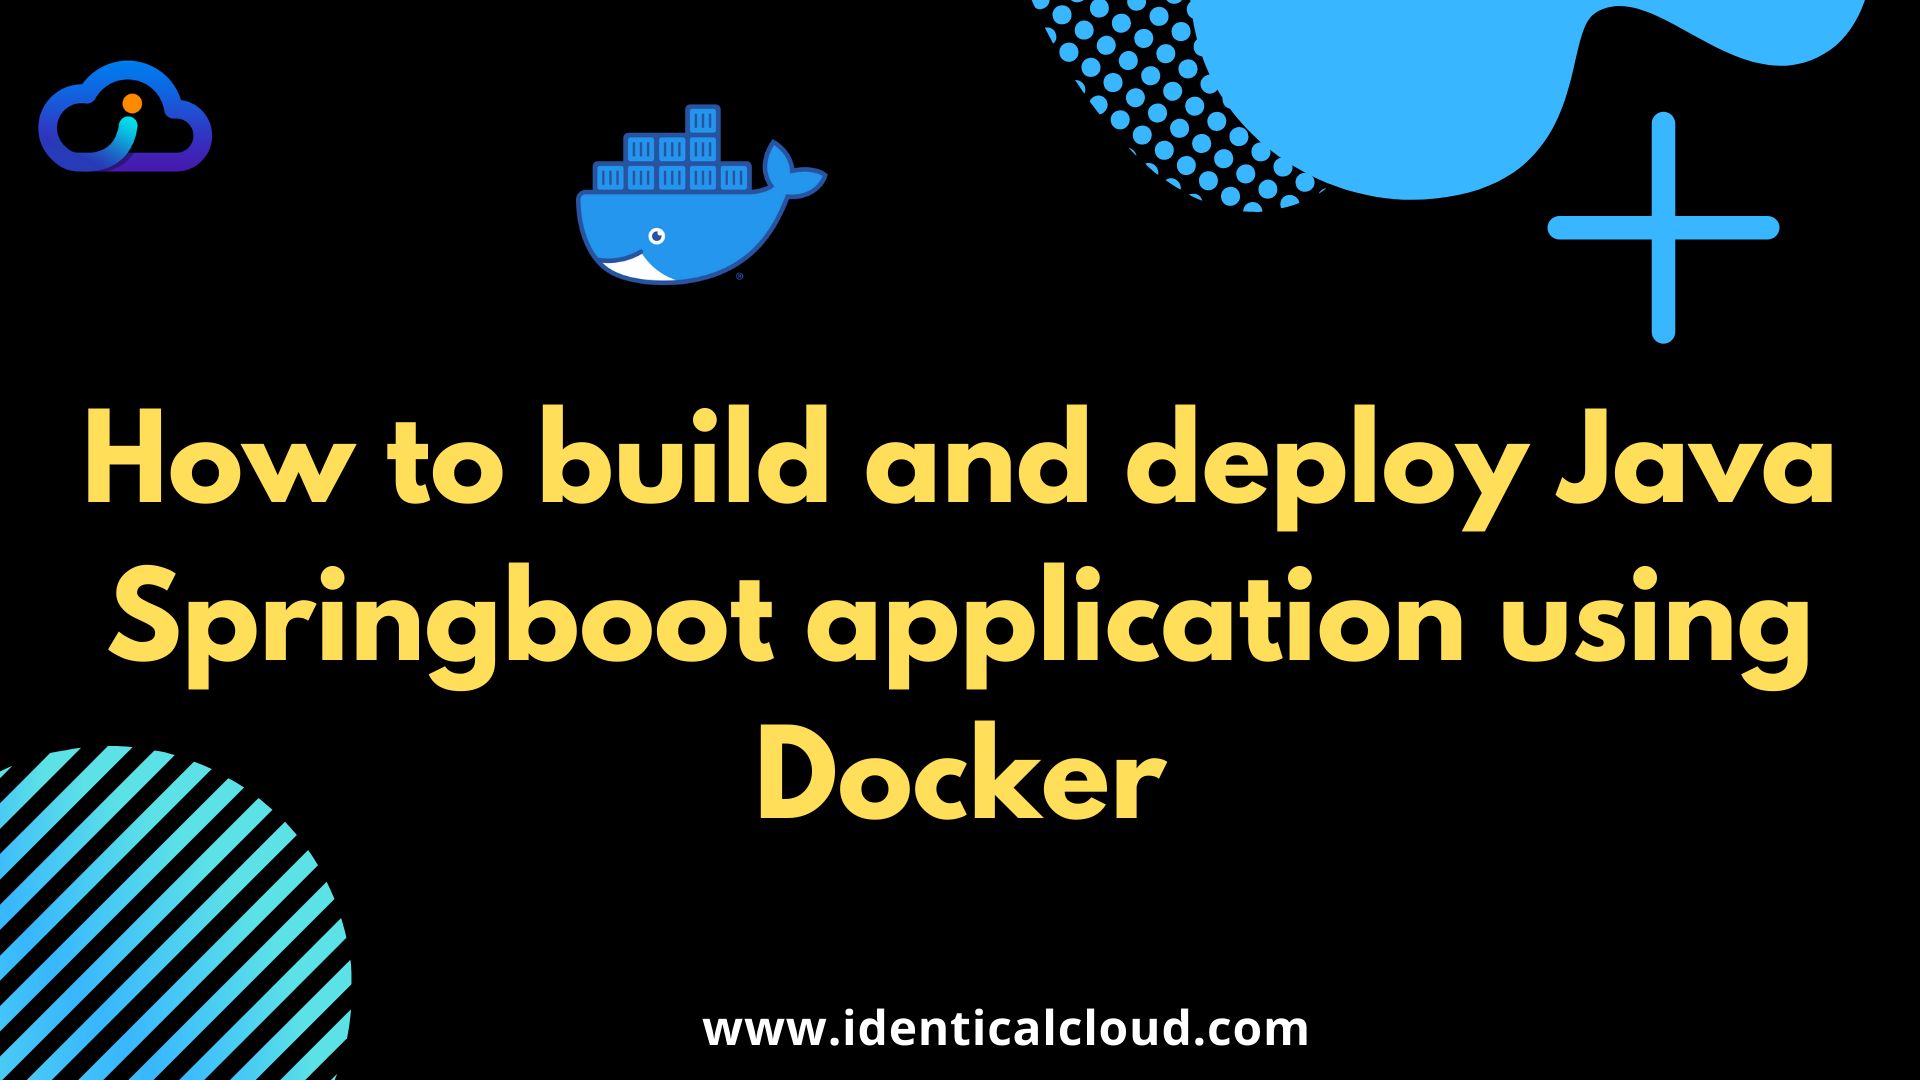 How to build and deploy Java Spring boot application using Docker